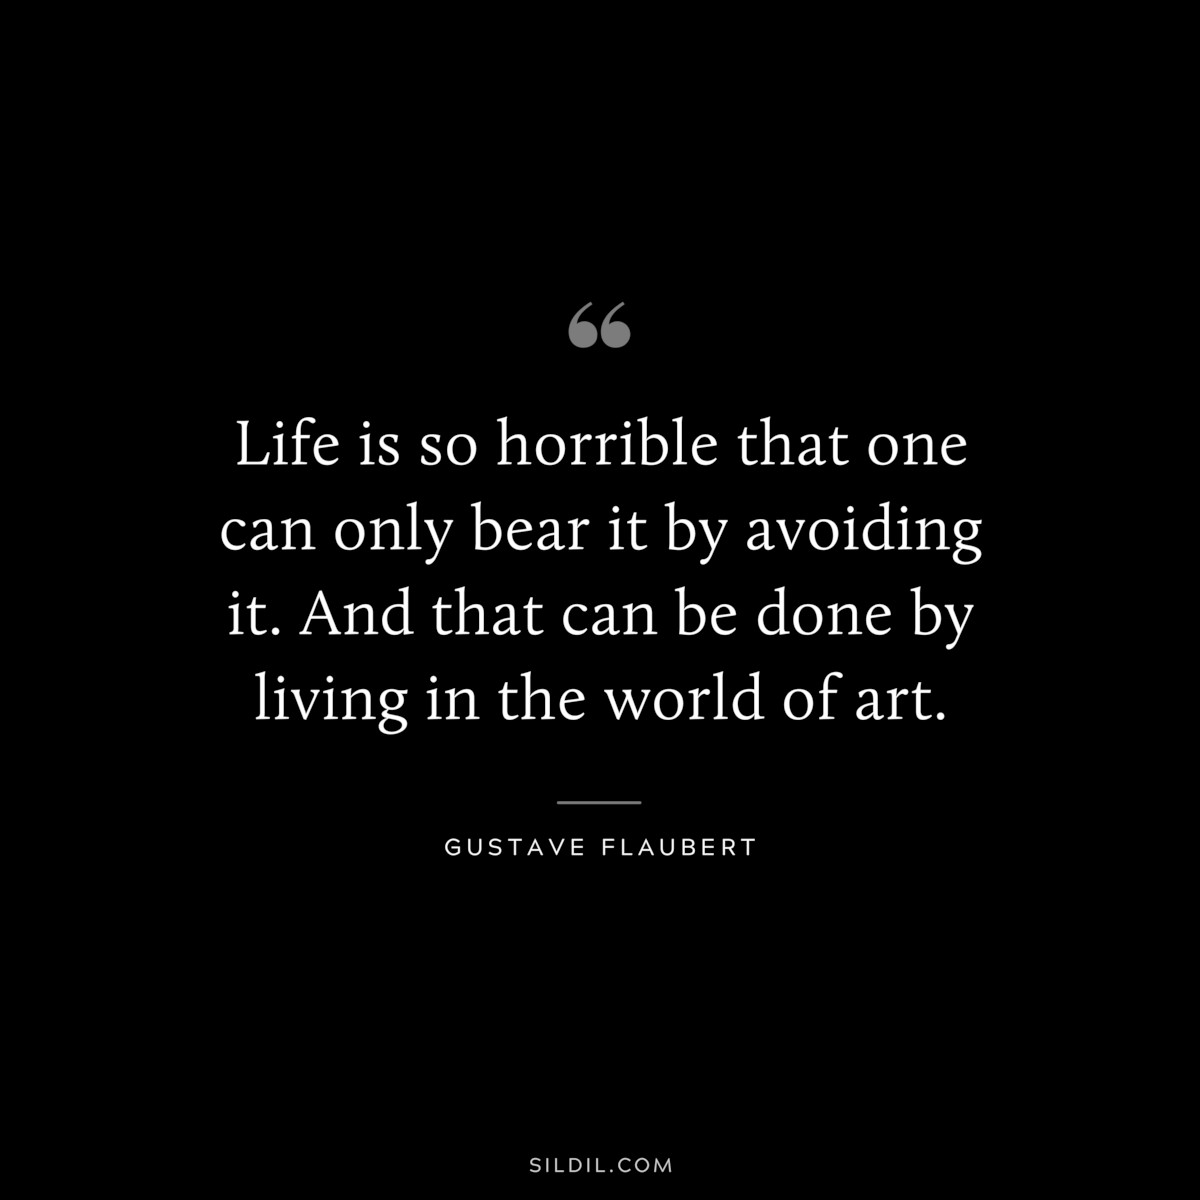 Life is so horrible that one can only bear it by avoiding it. And that can be done by living in the world of art. ― Gustave Flaubert